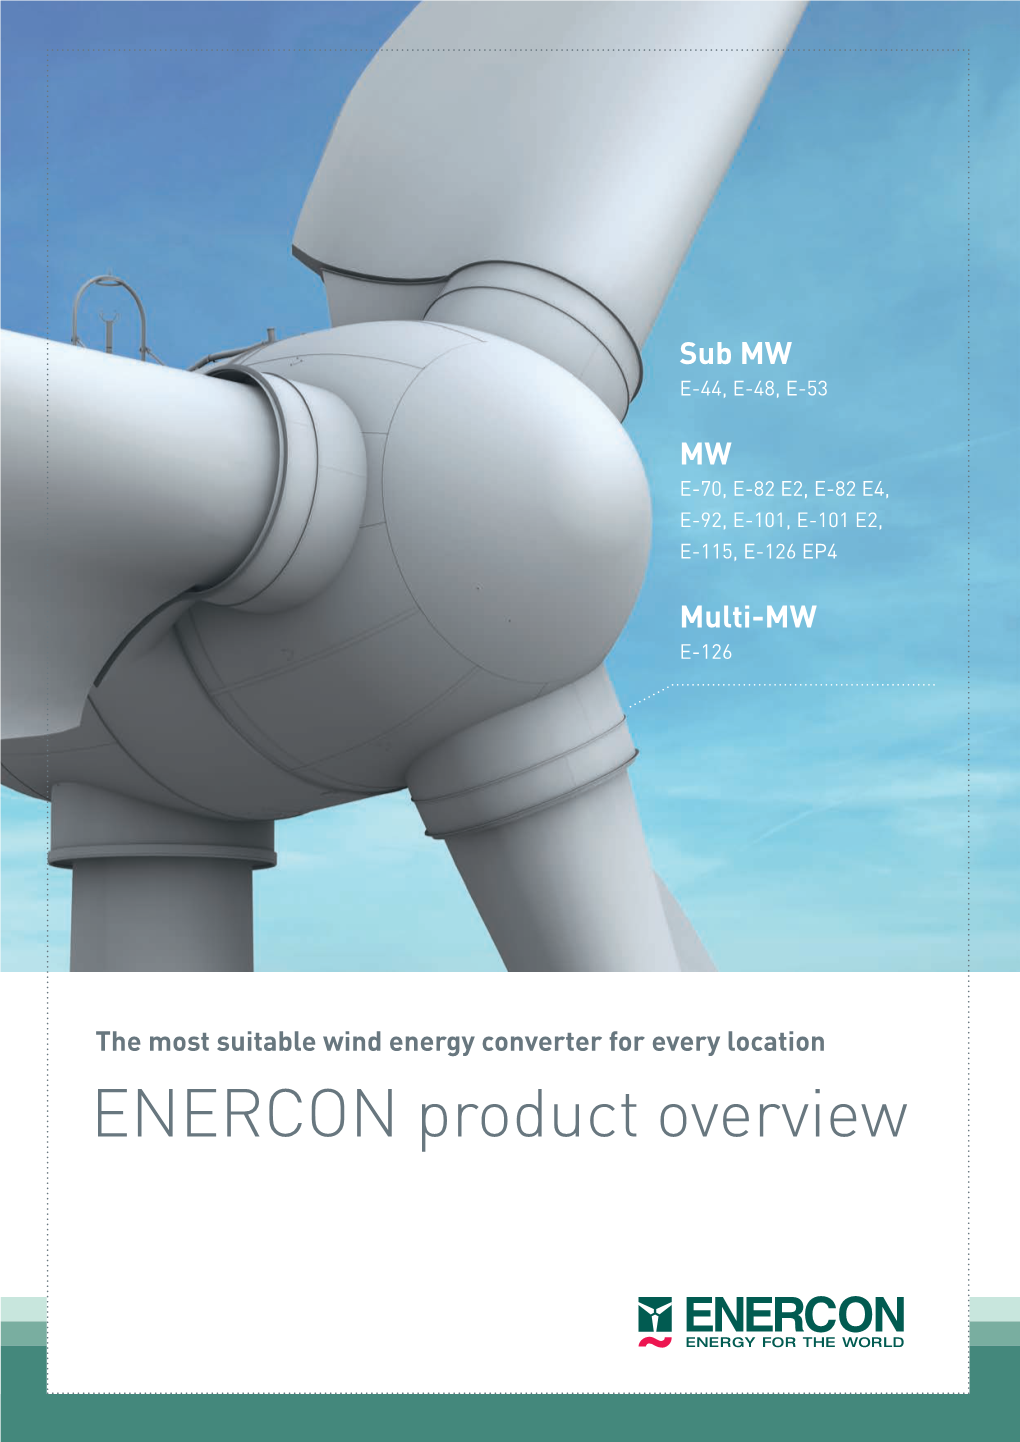 RCON, 2015. ENERCON Product Overview